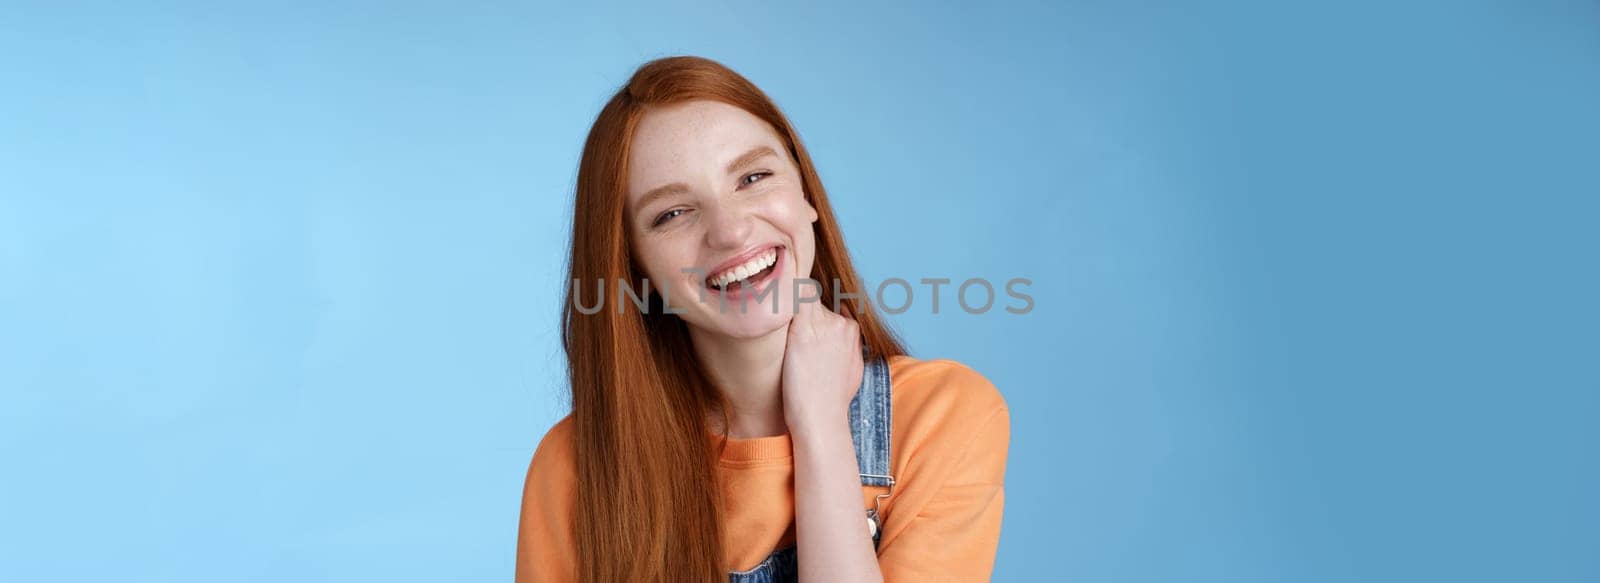 Lifestyle. Carefree silly flirty young redhead girlfriend having fun enjoying lovely date summer evening laughing out loud smiling broadly tilting head touching neck shy blushing acting cute blue background.